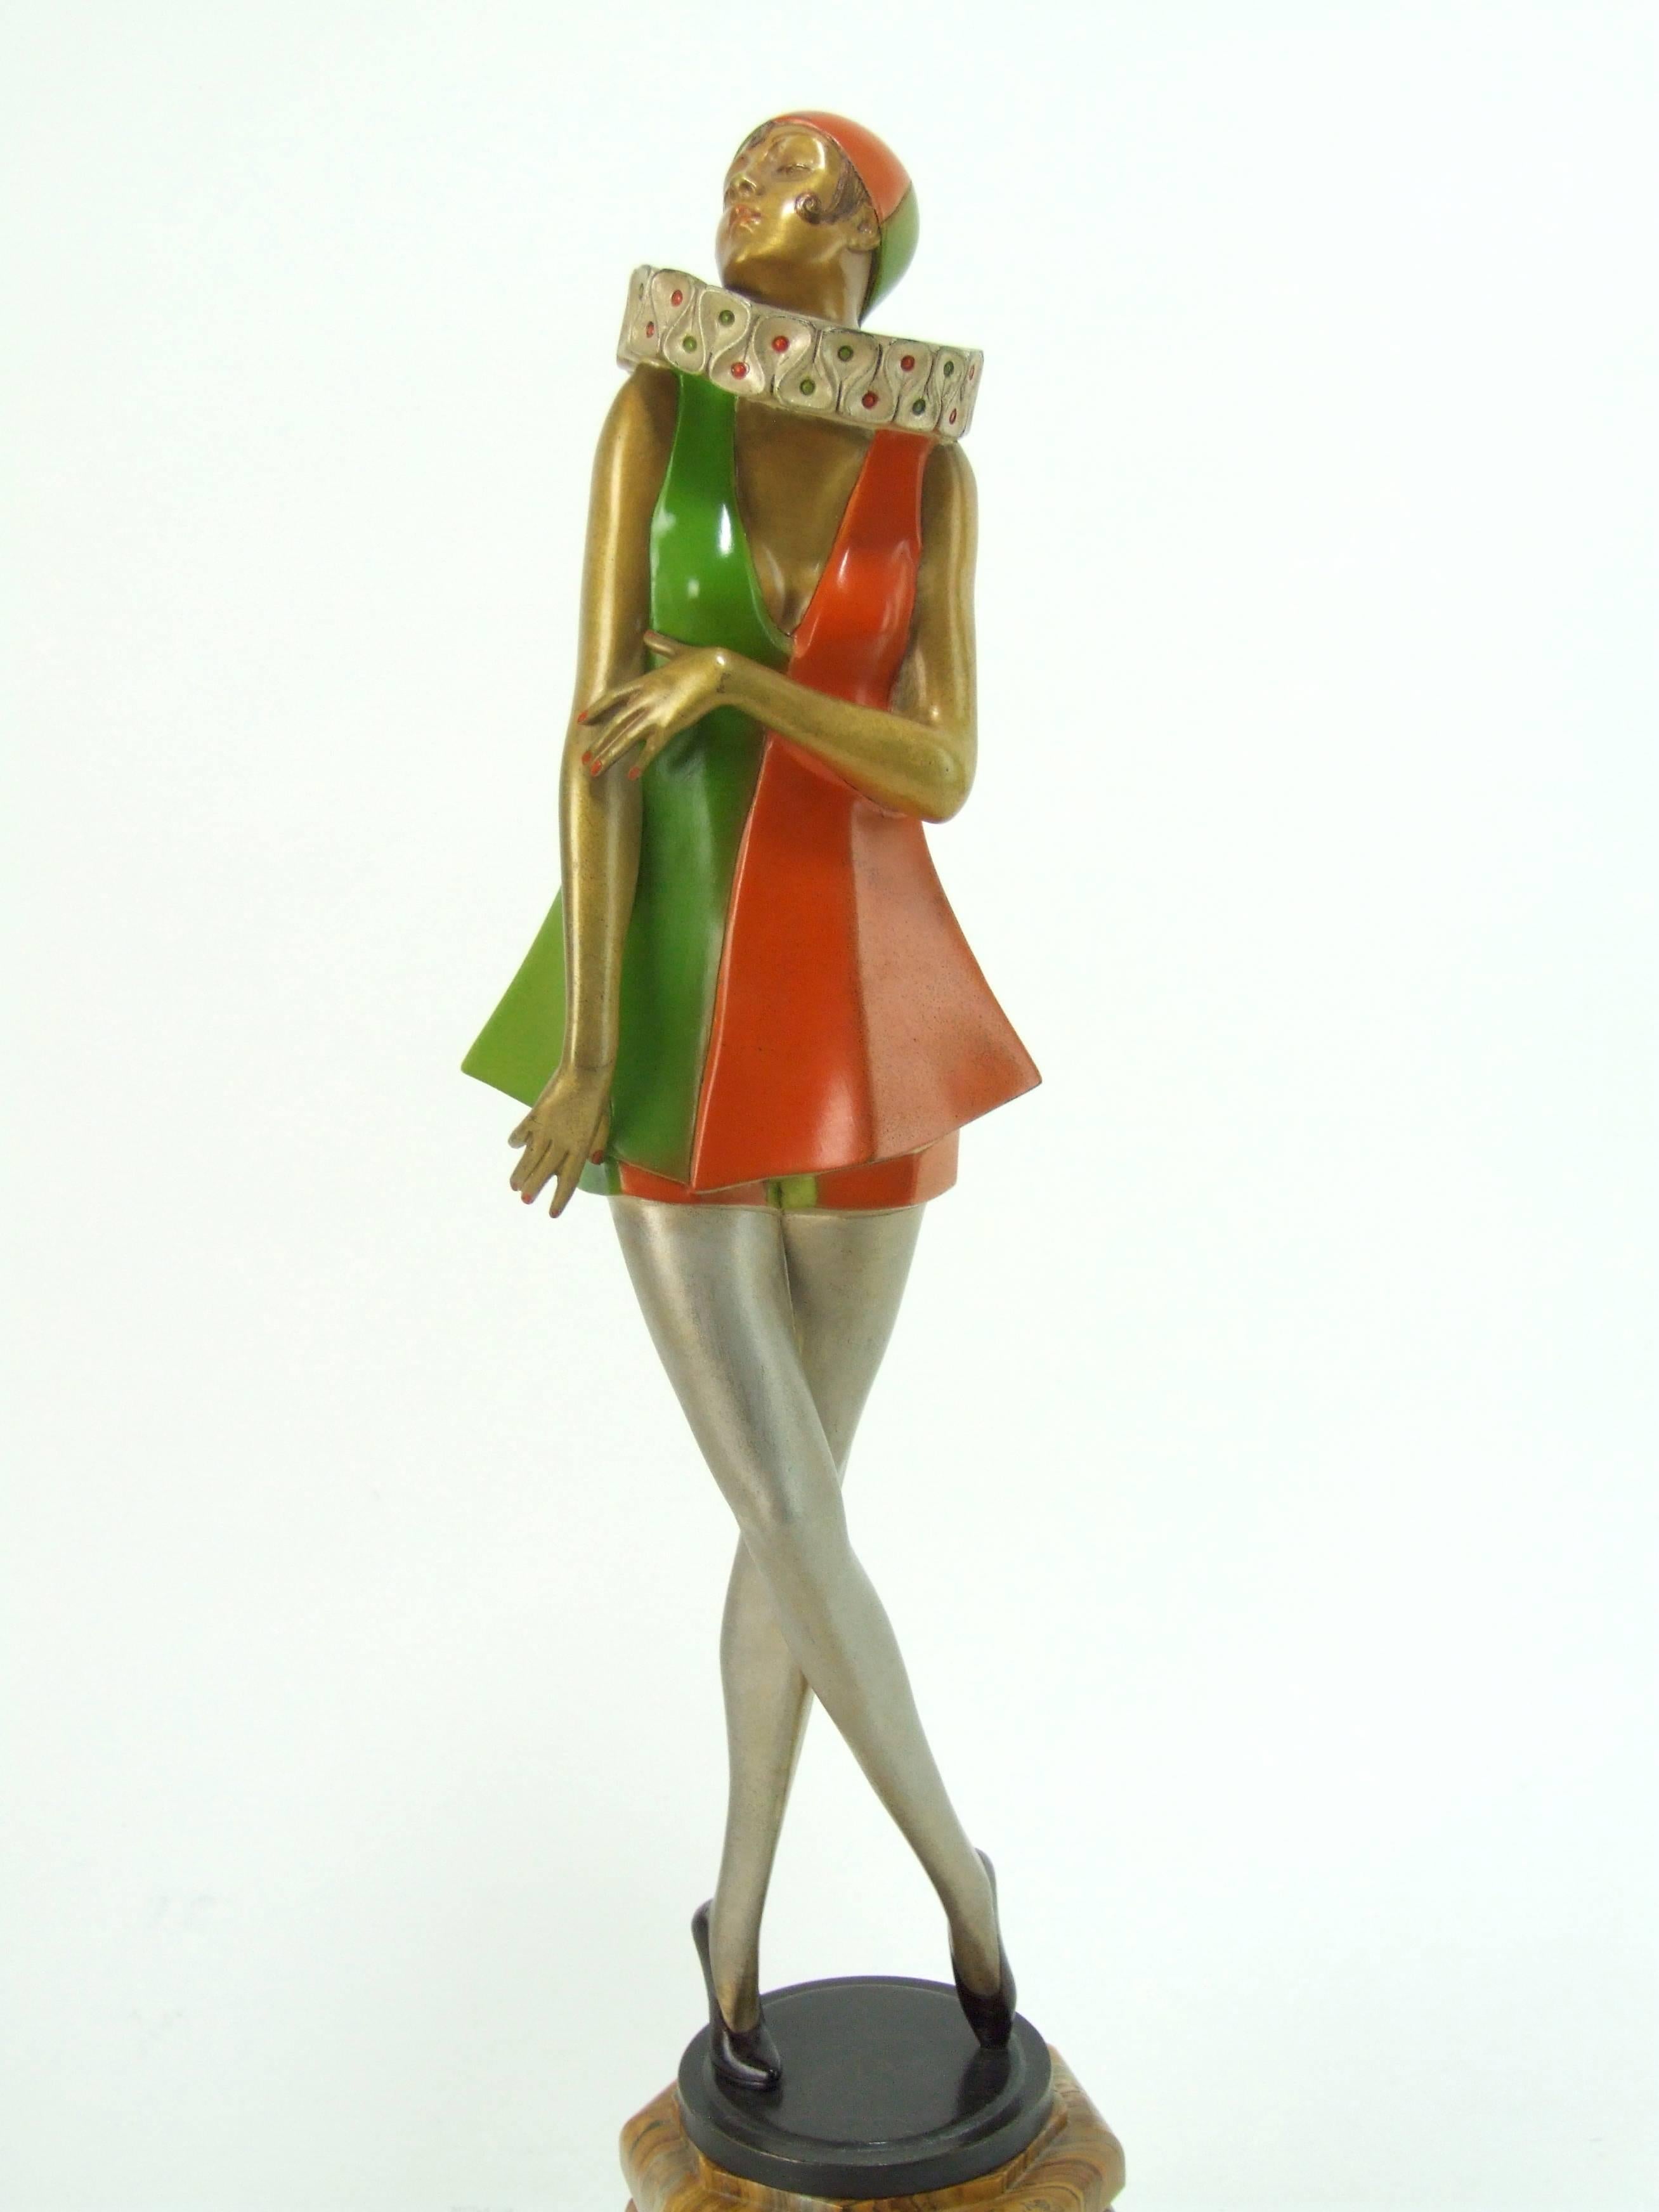 Large and rare bronze art deco harlequin dancer by Josef Lorenzl, circa 1925 and signed in the bronze. Original orange and green enamelling to her costume. Mounted on a raised faceted stepped onyx base. It measures a large 18 inches high (45.5cm).